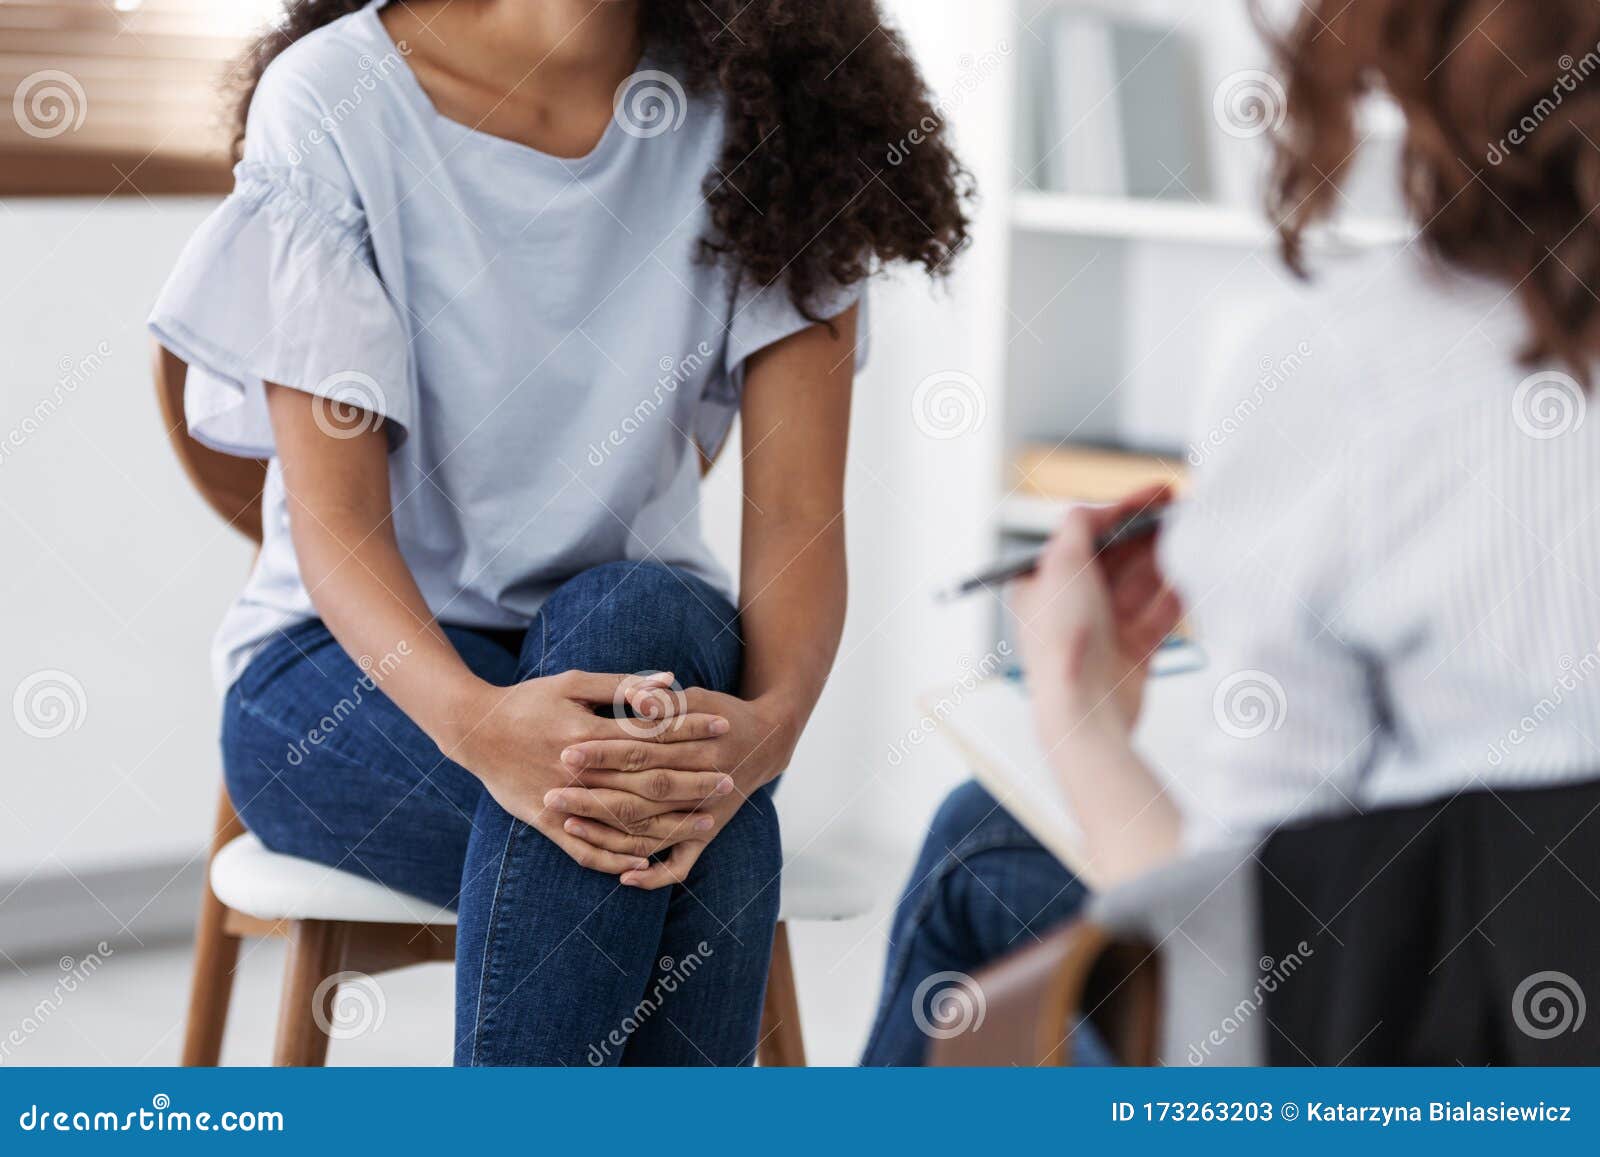 anonymous photo of women during group psychotherapy for people with depression